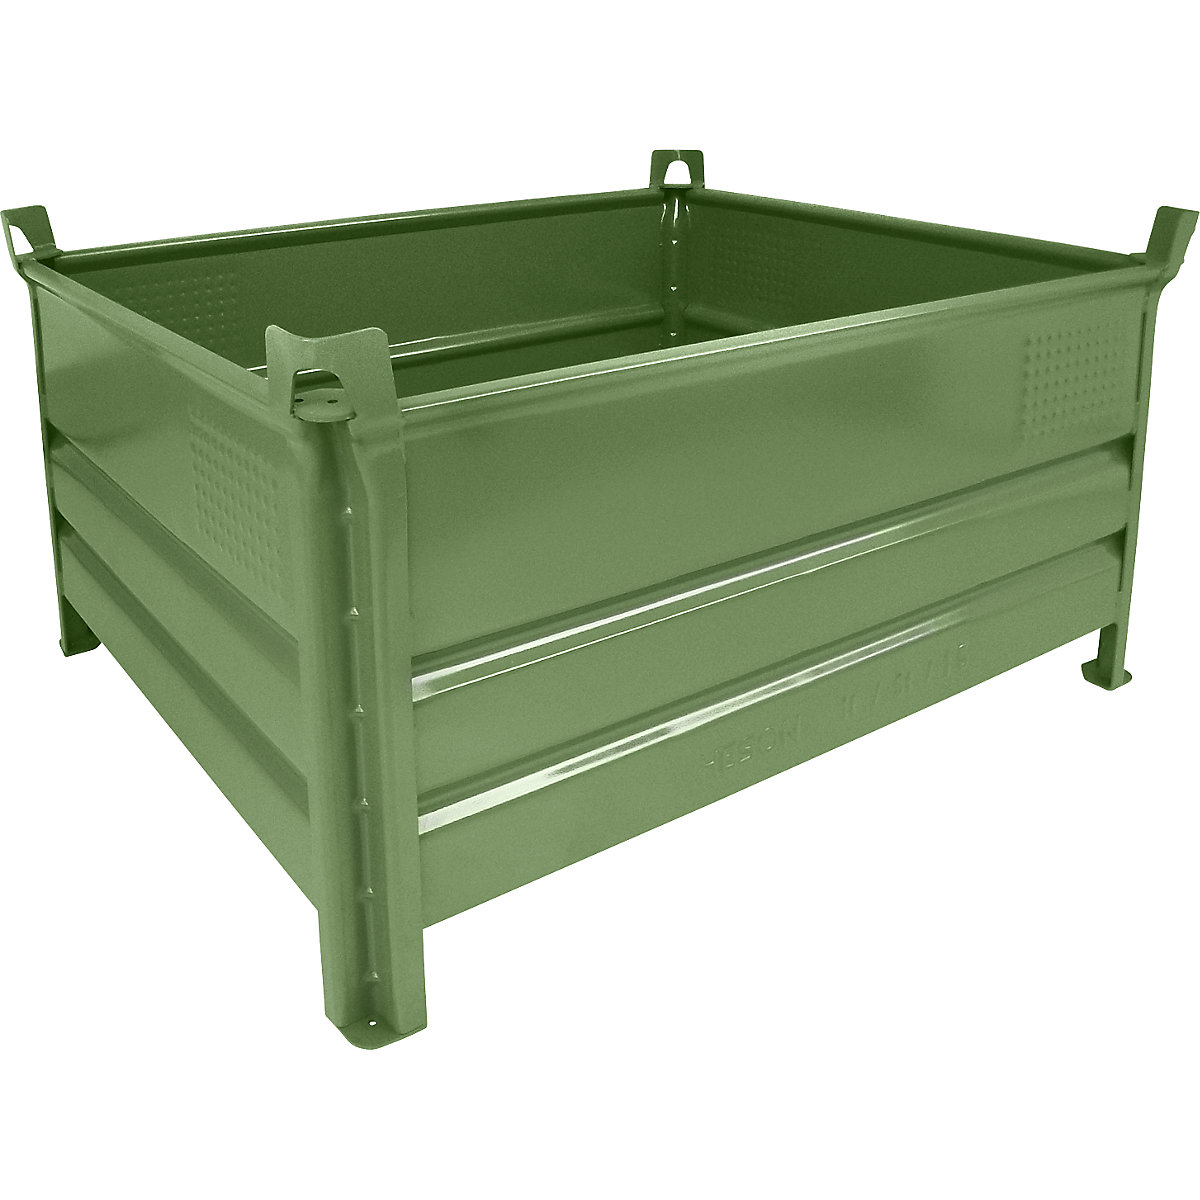 Solid panel box pallet – Heson, WxL 1000 x 1200 mm, max. load 2000 kg, green, 10+ items-5